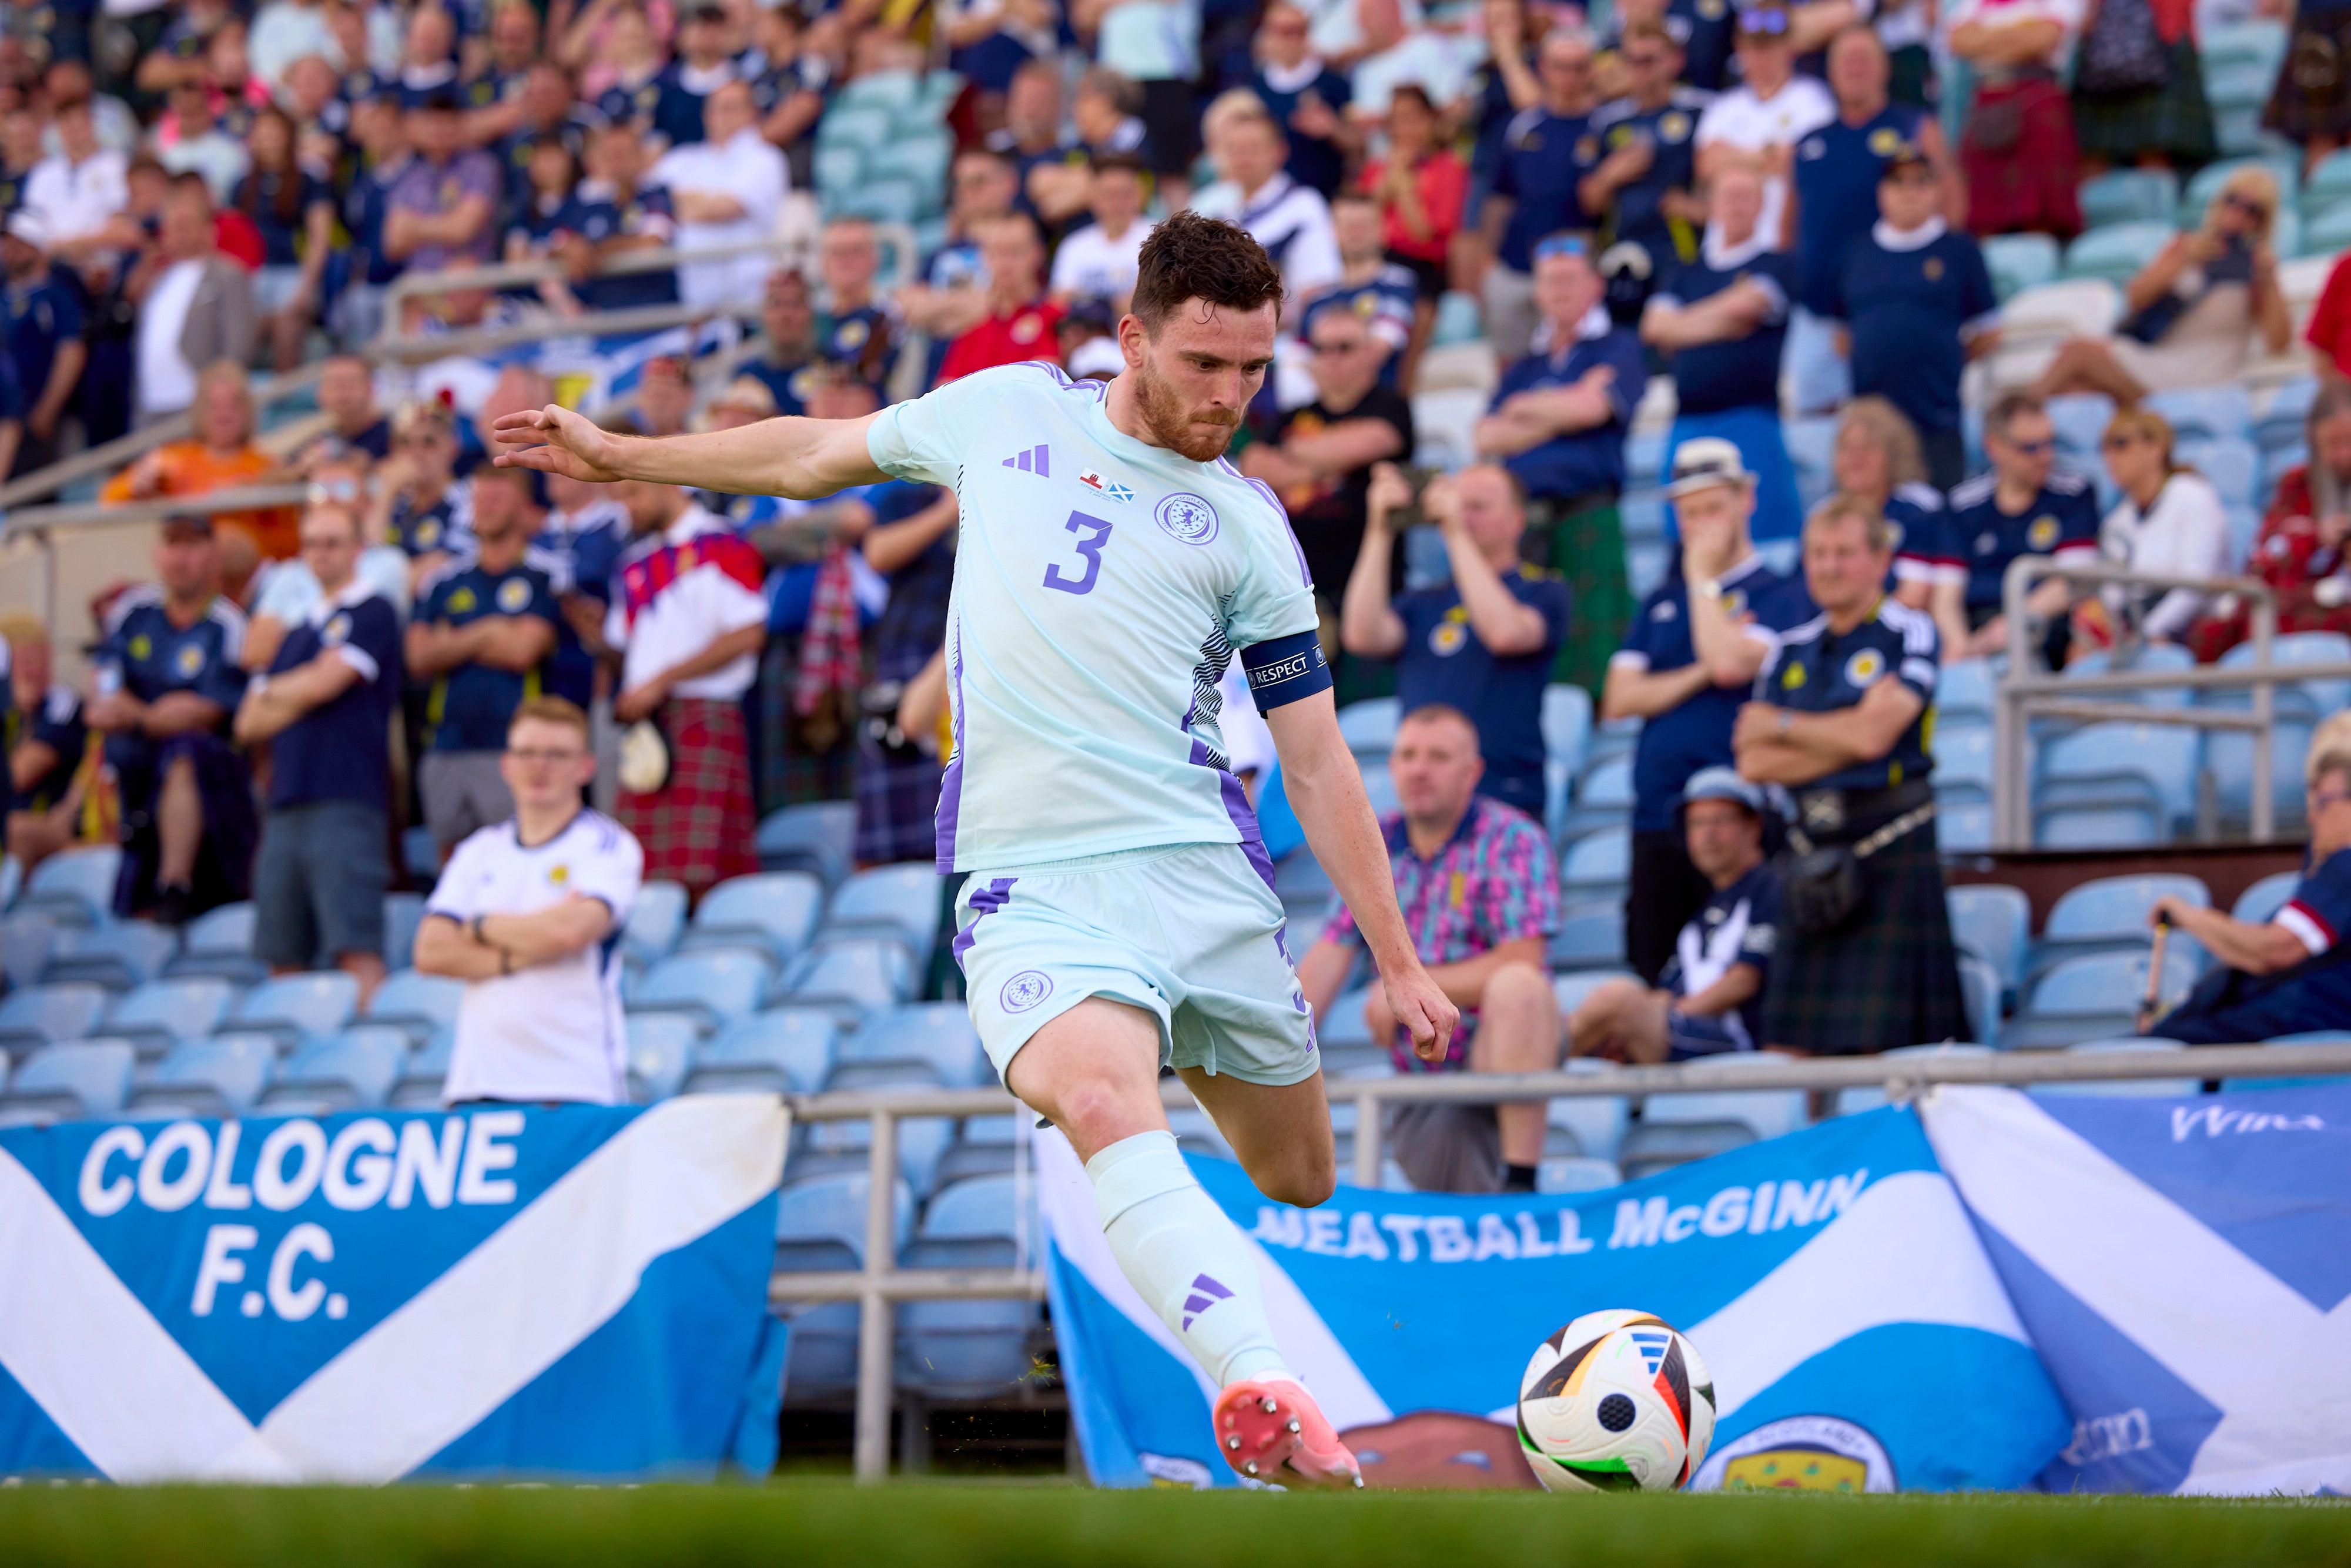 Captain Andy Robertson and the rest of the Scotland side face a tough test